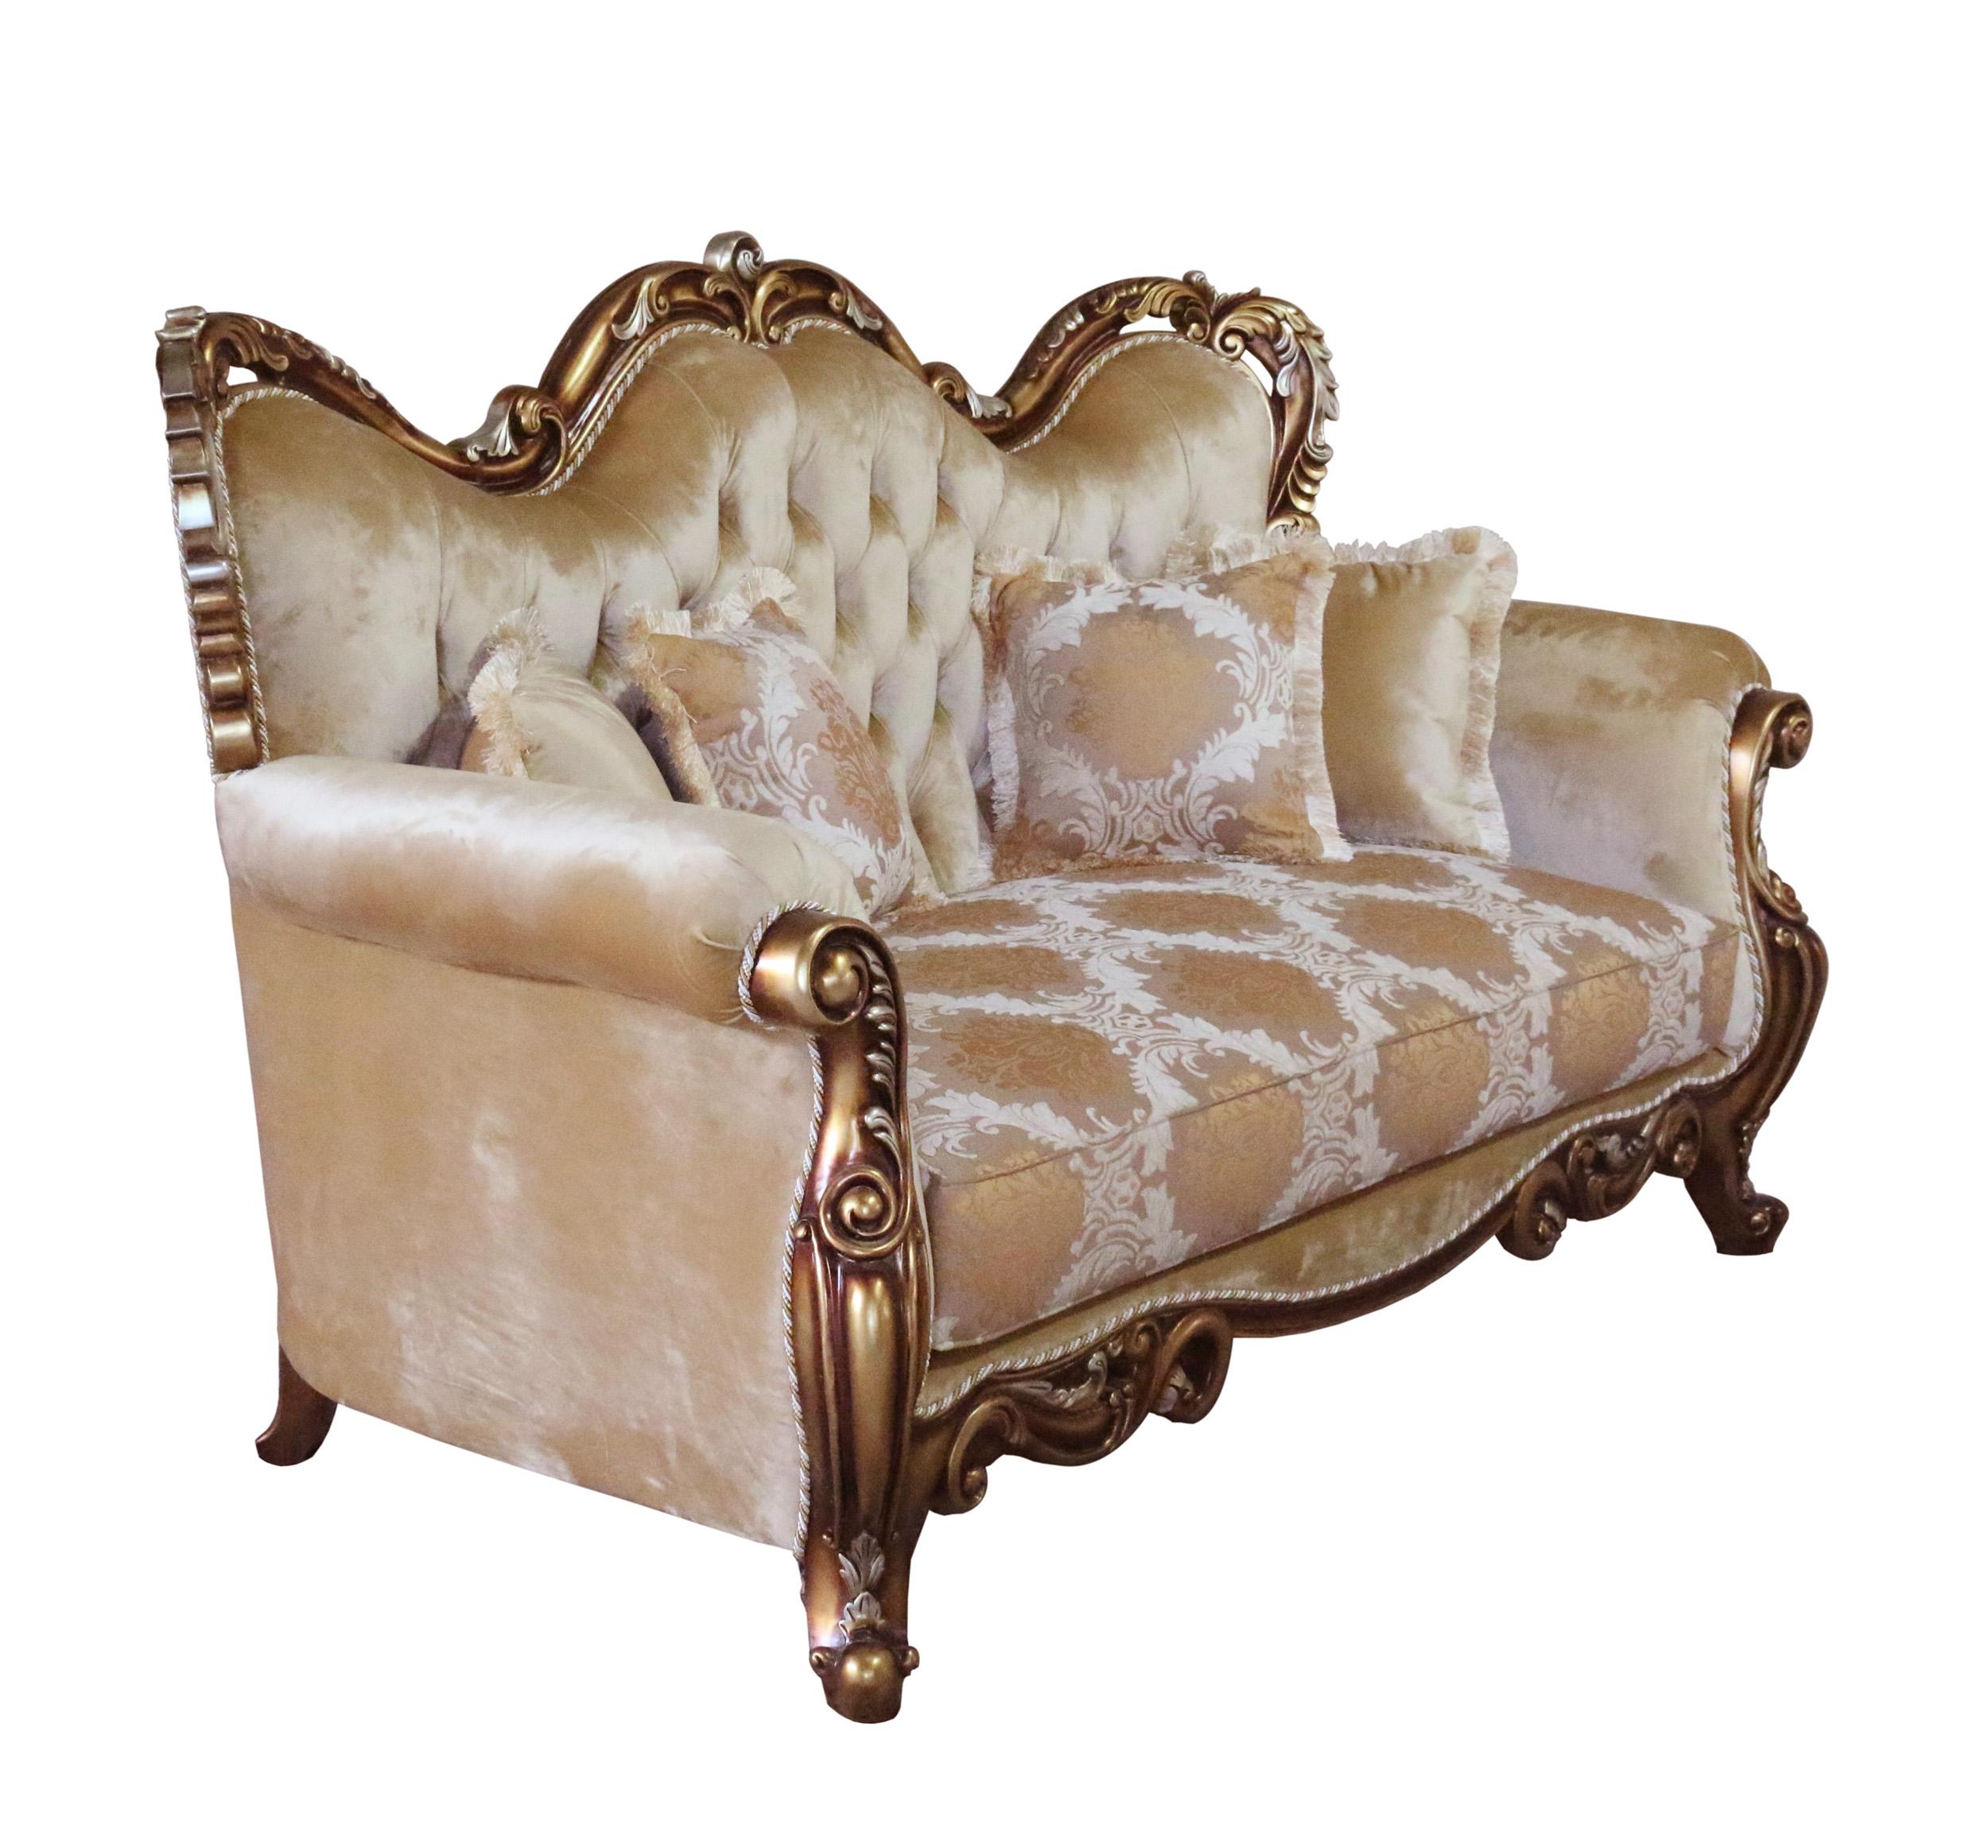 Classic, Traditional Loveseat TIZIANO 38994-L in Antique, Silver, Gold, Brown Fabric